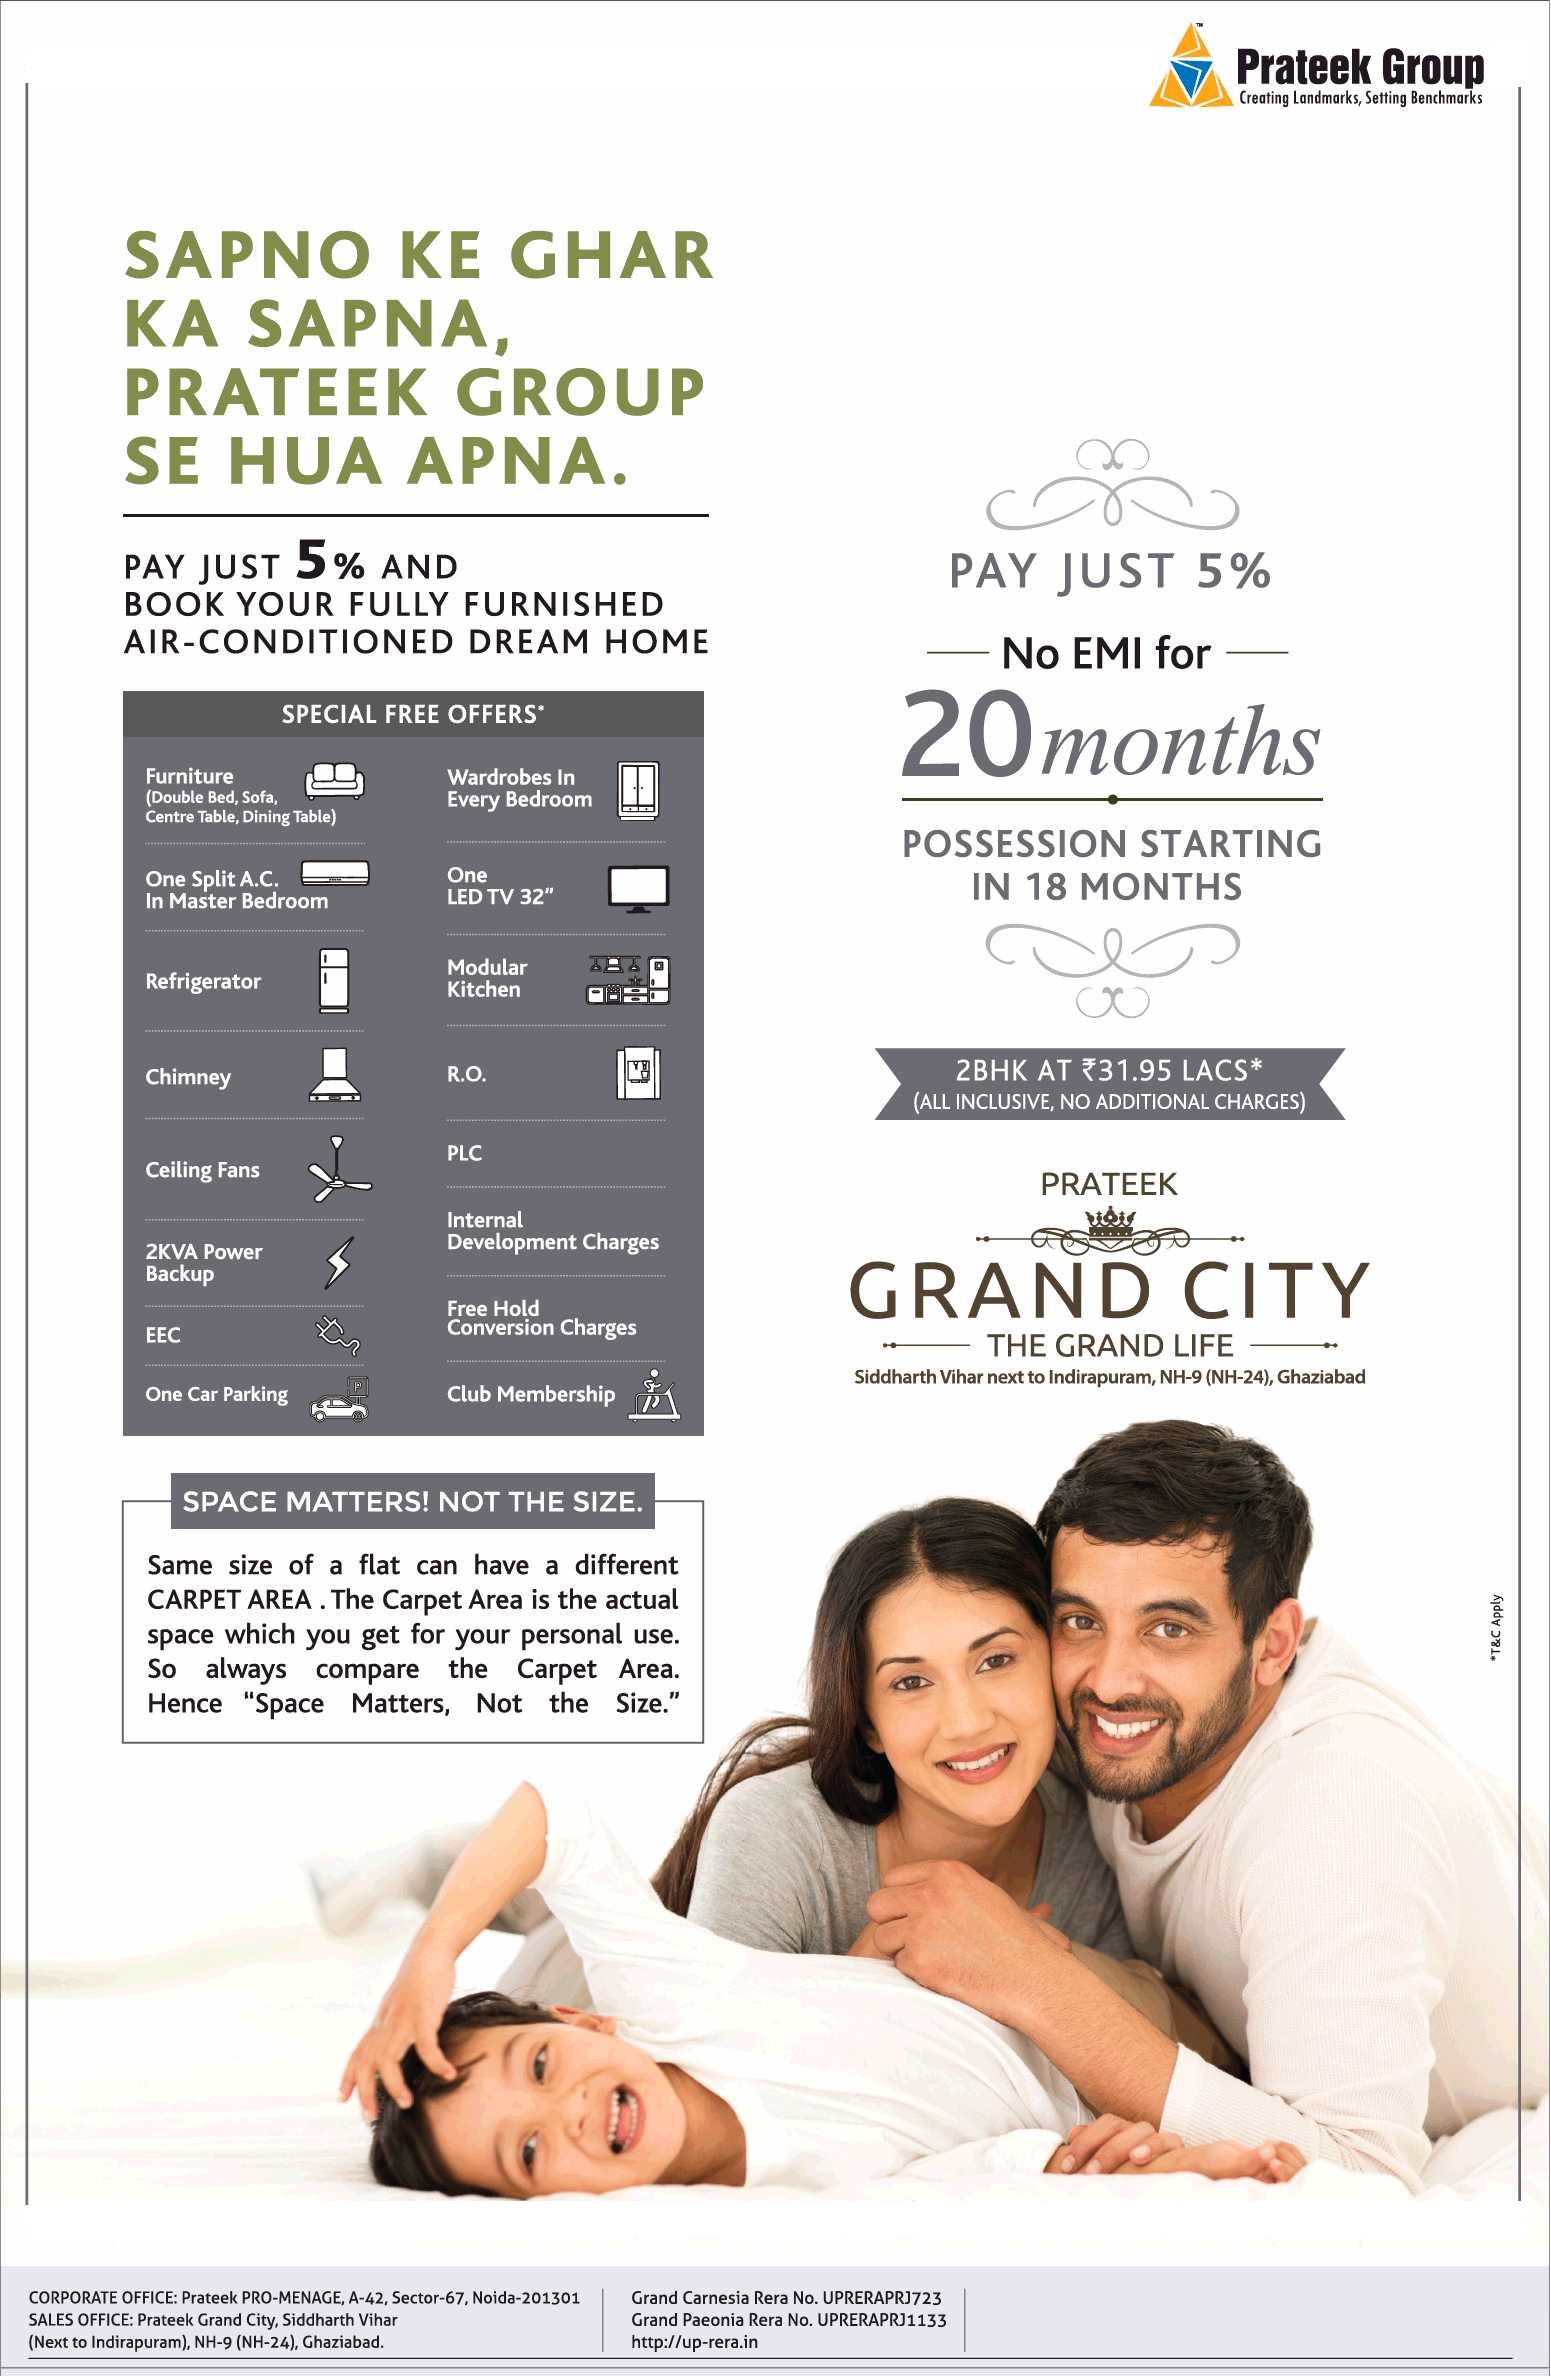 Pay just 5% & no EMI for 20 months at Prateek Grand City in Ghaziabad Update